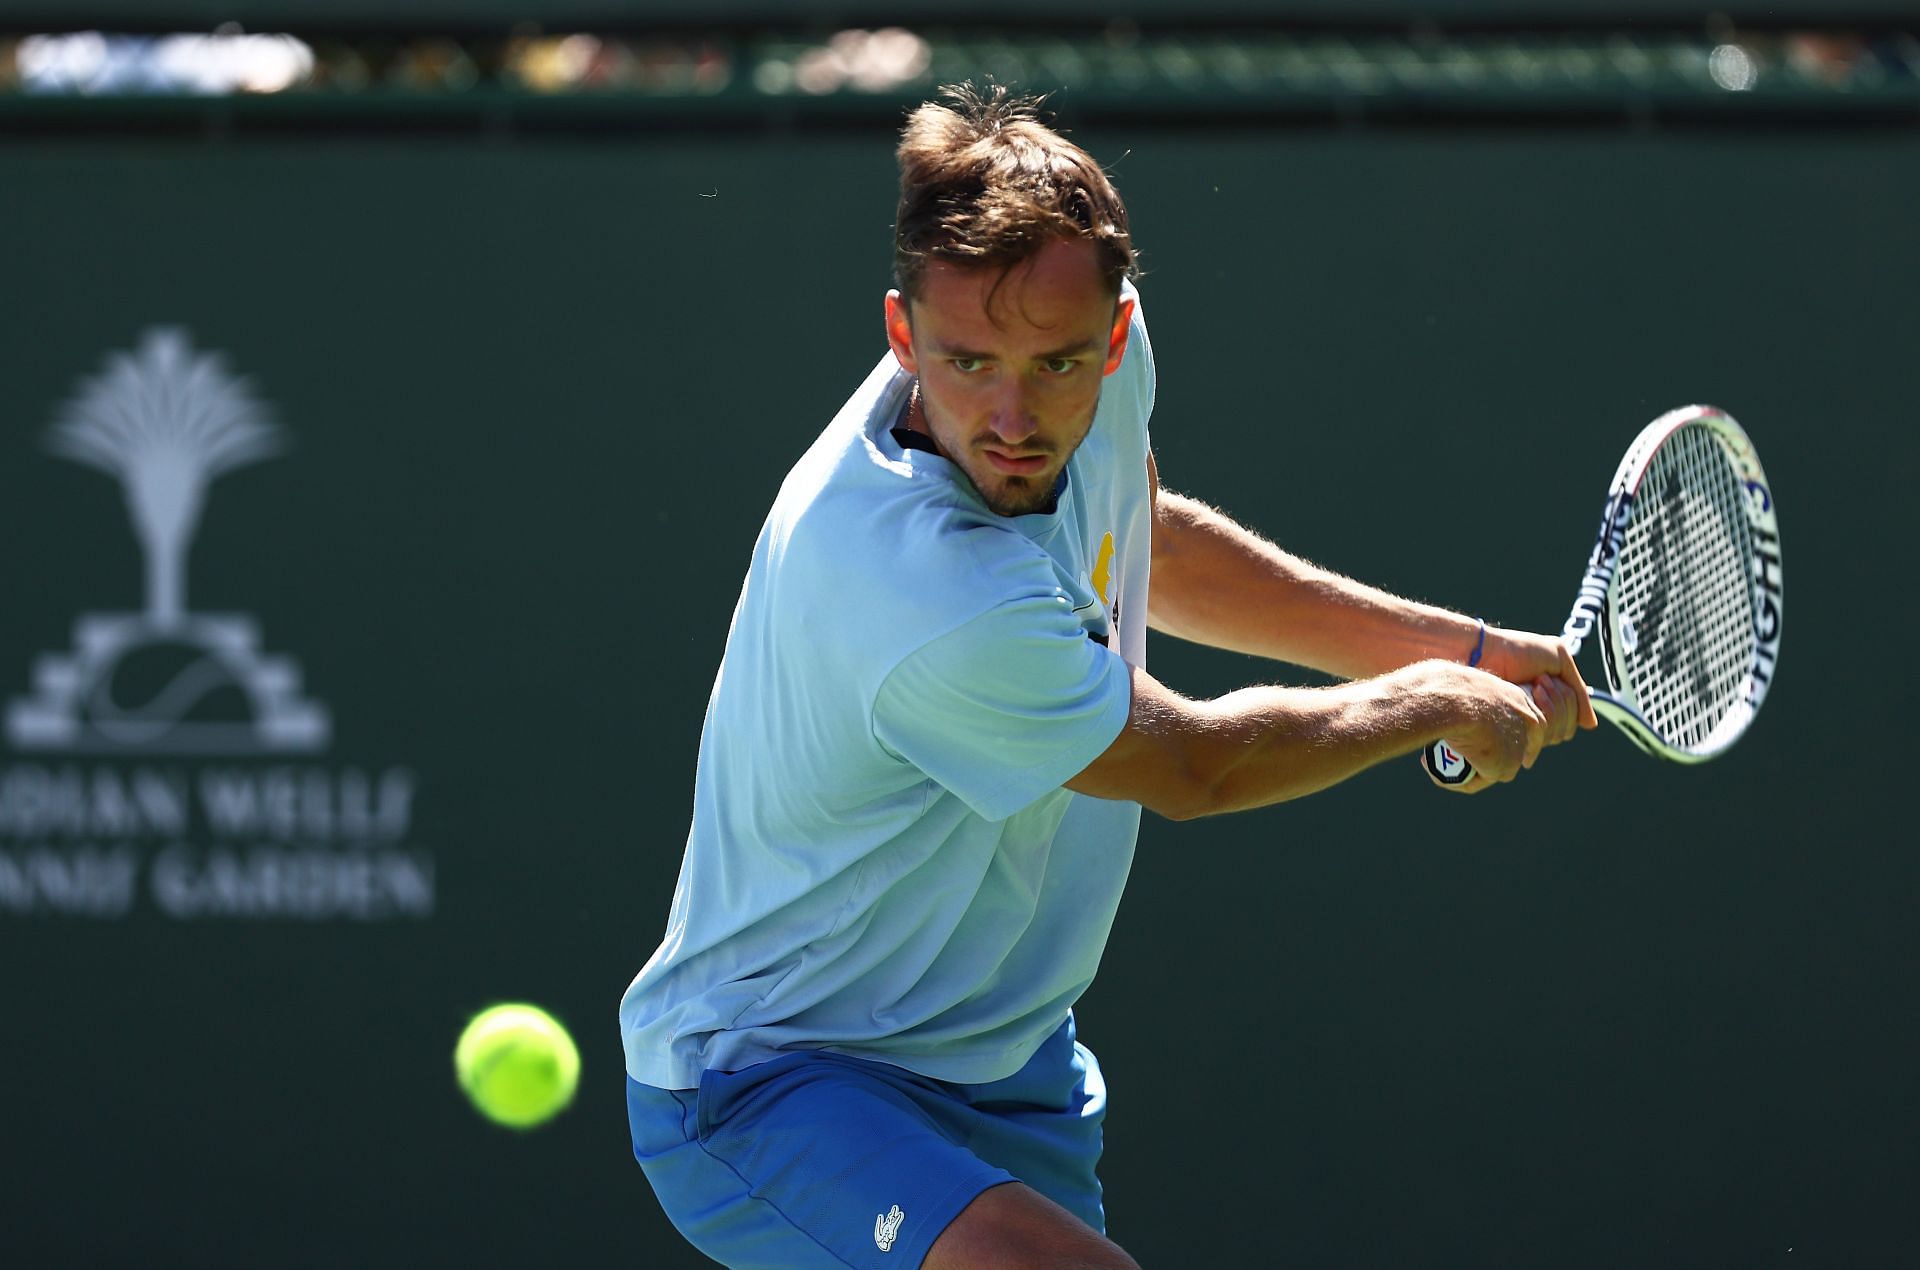 Daniil Medvedev is among the favorites to win the Indian Wells Masters